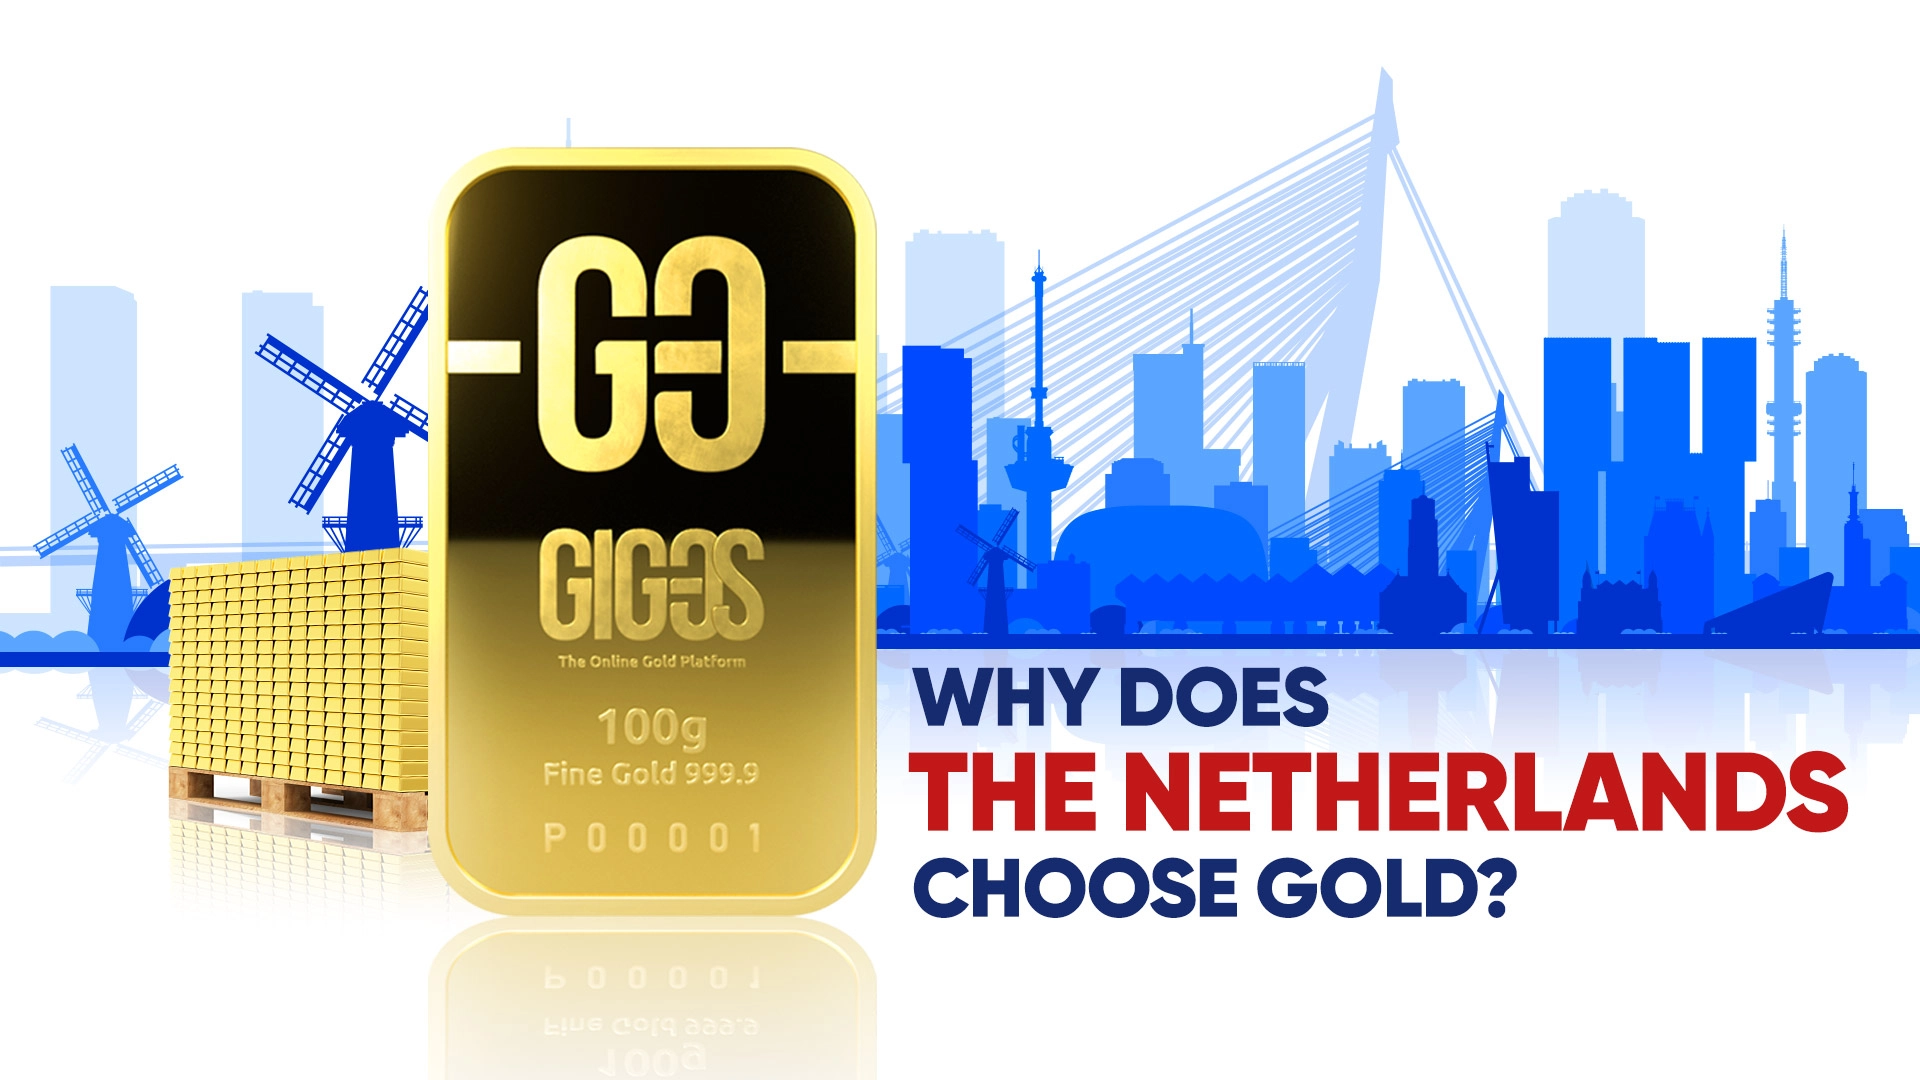 [VIDEO] Why do the Dutch choose precisely gold?